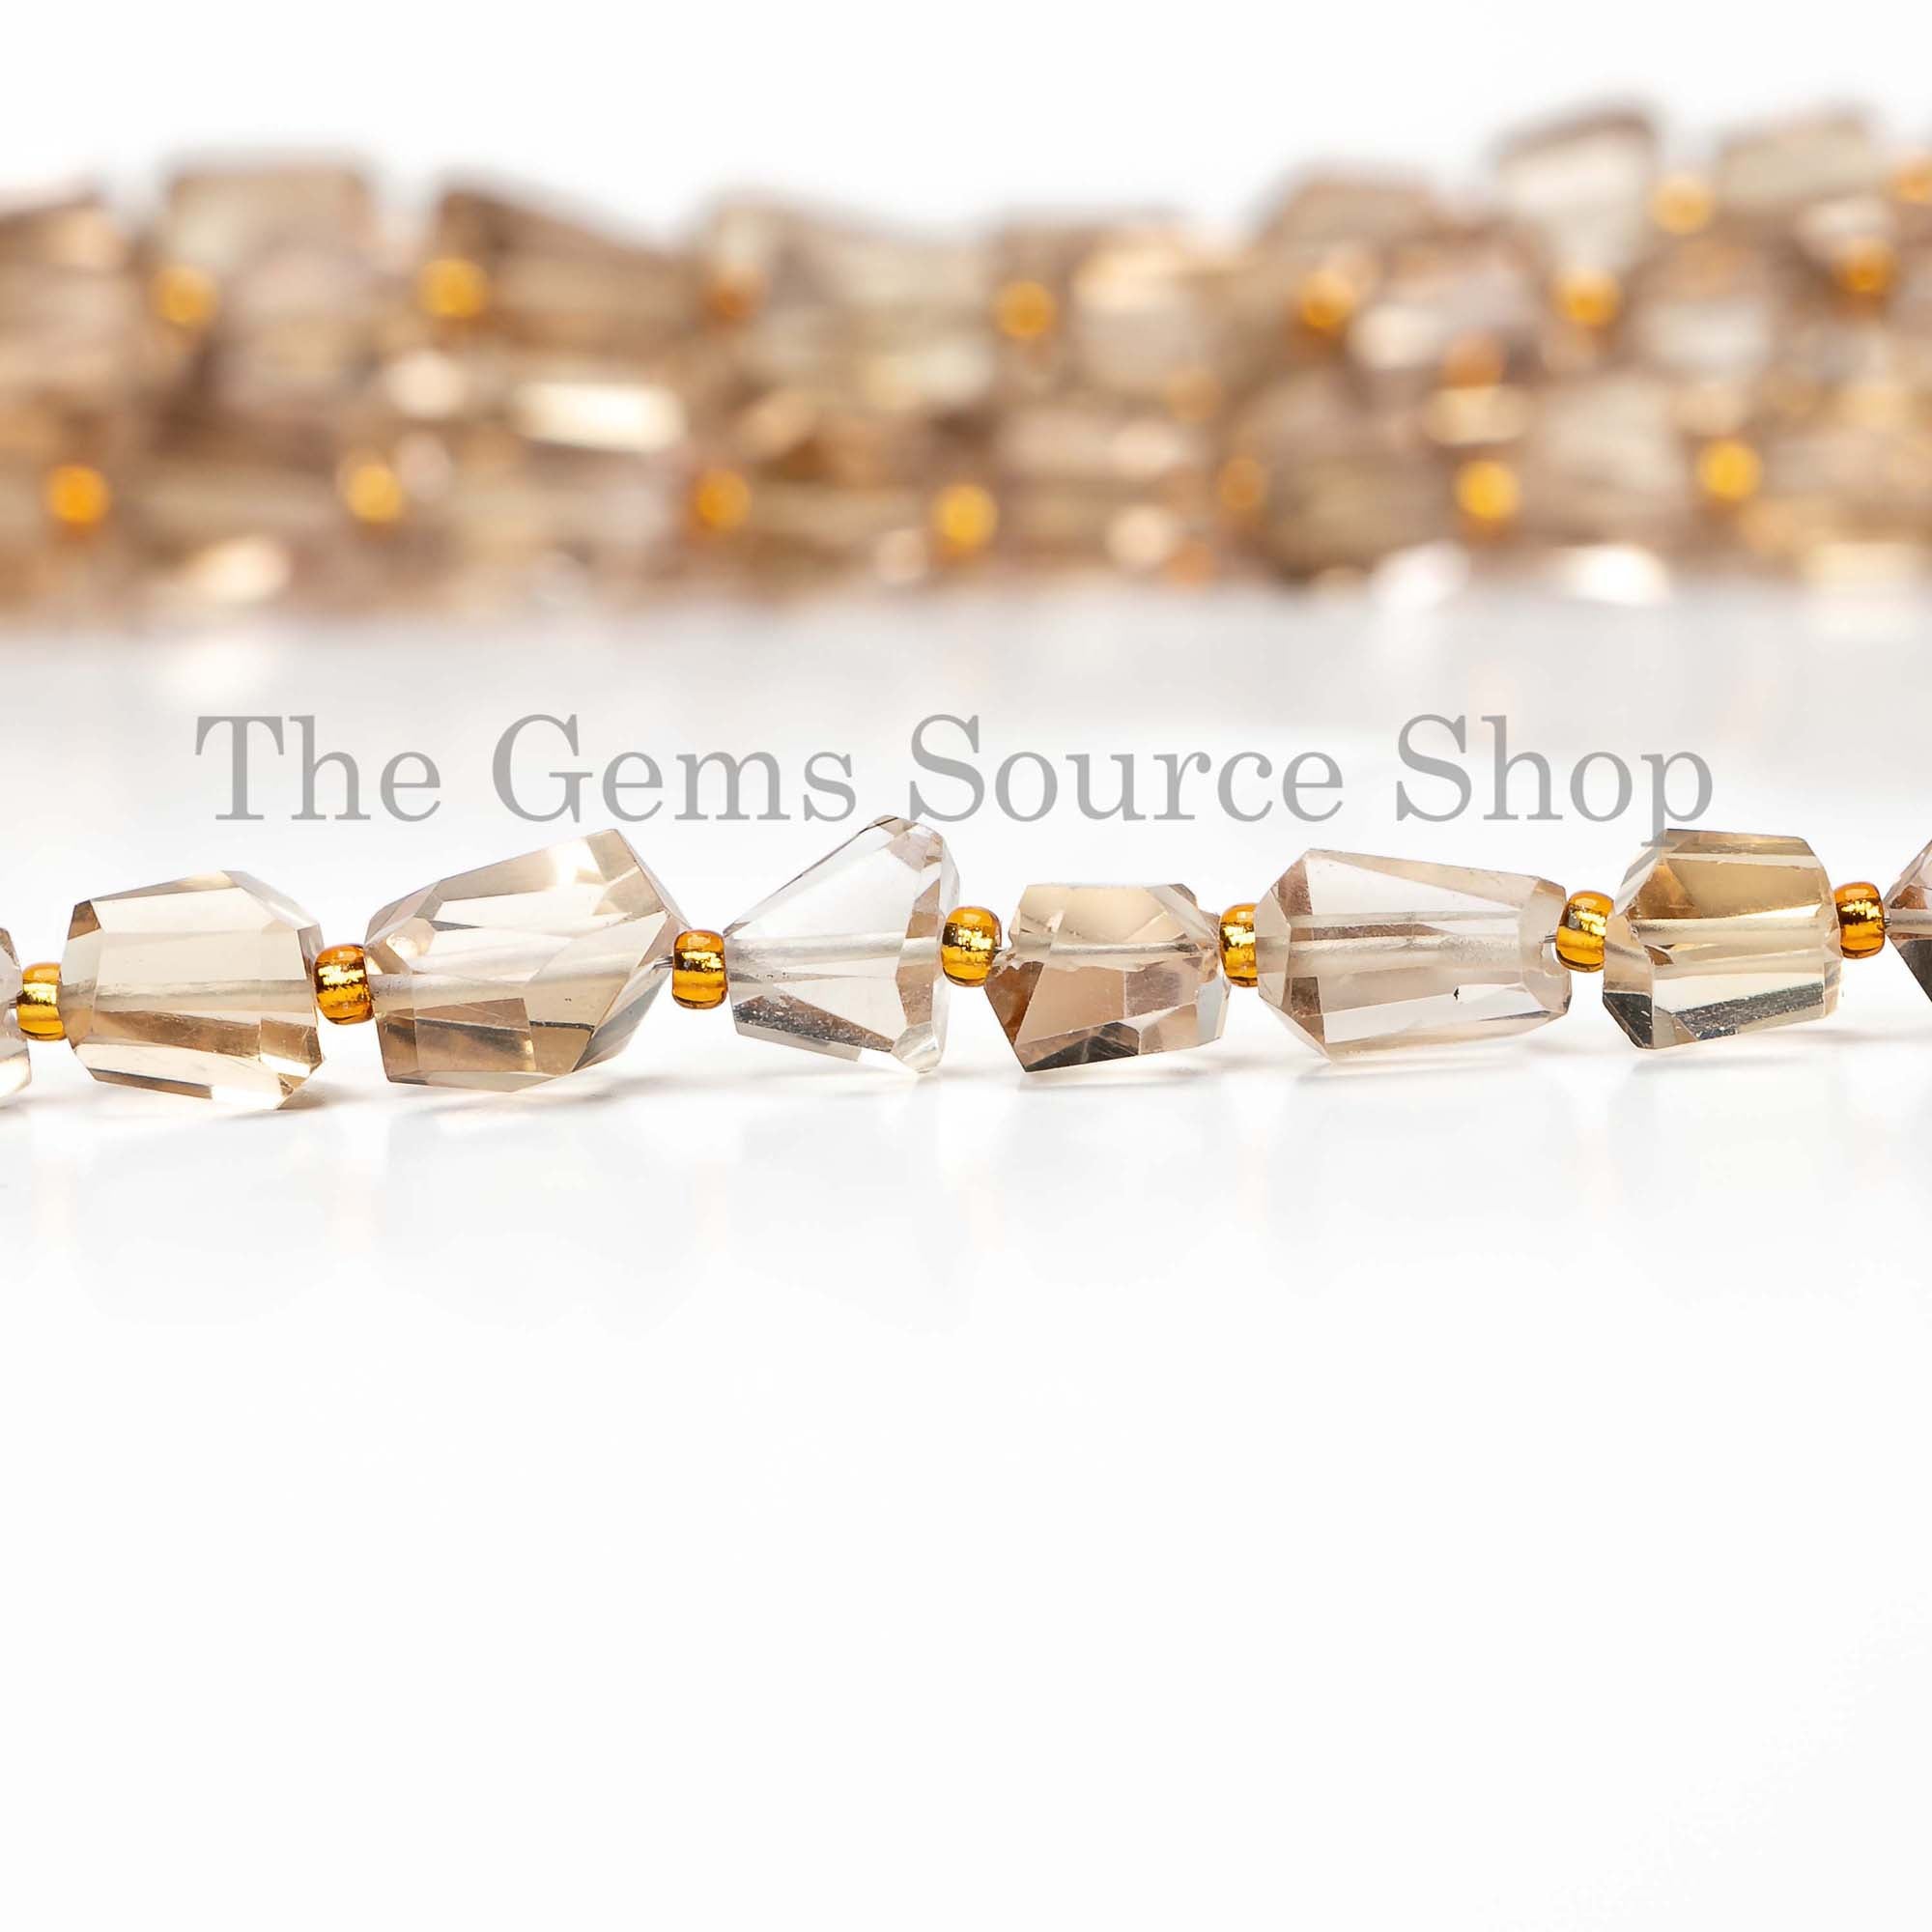 Champagne Quartz Faceted  Nugget Beads, Fancy Gemstone Beads